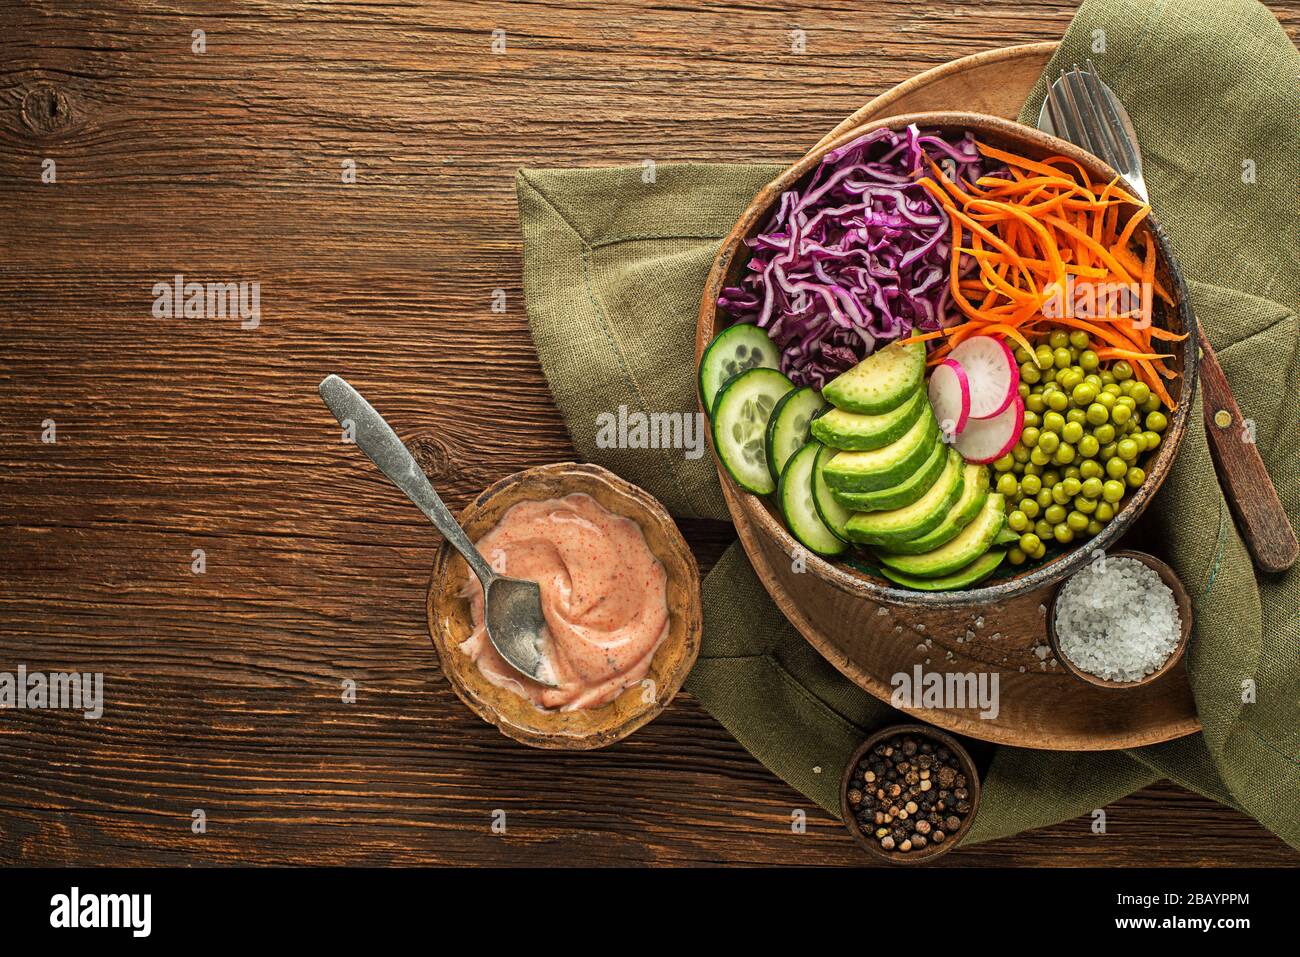 Healthy vegetable meal with cooked vegetables on wooden table Stock Photo